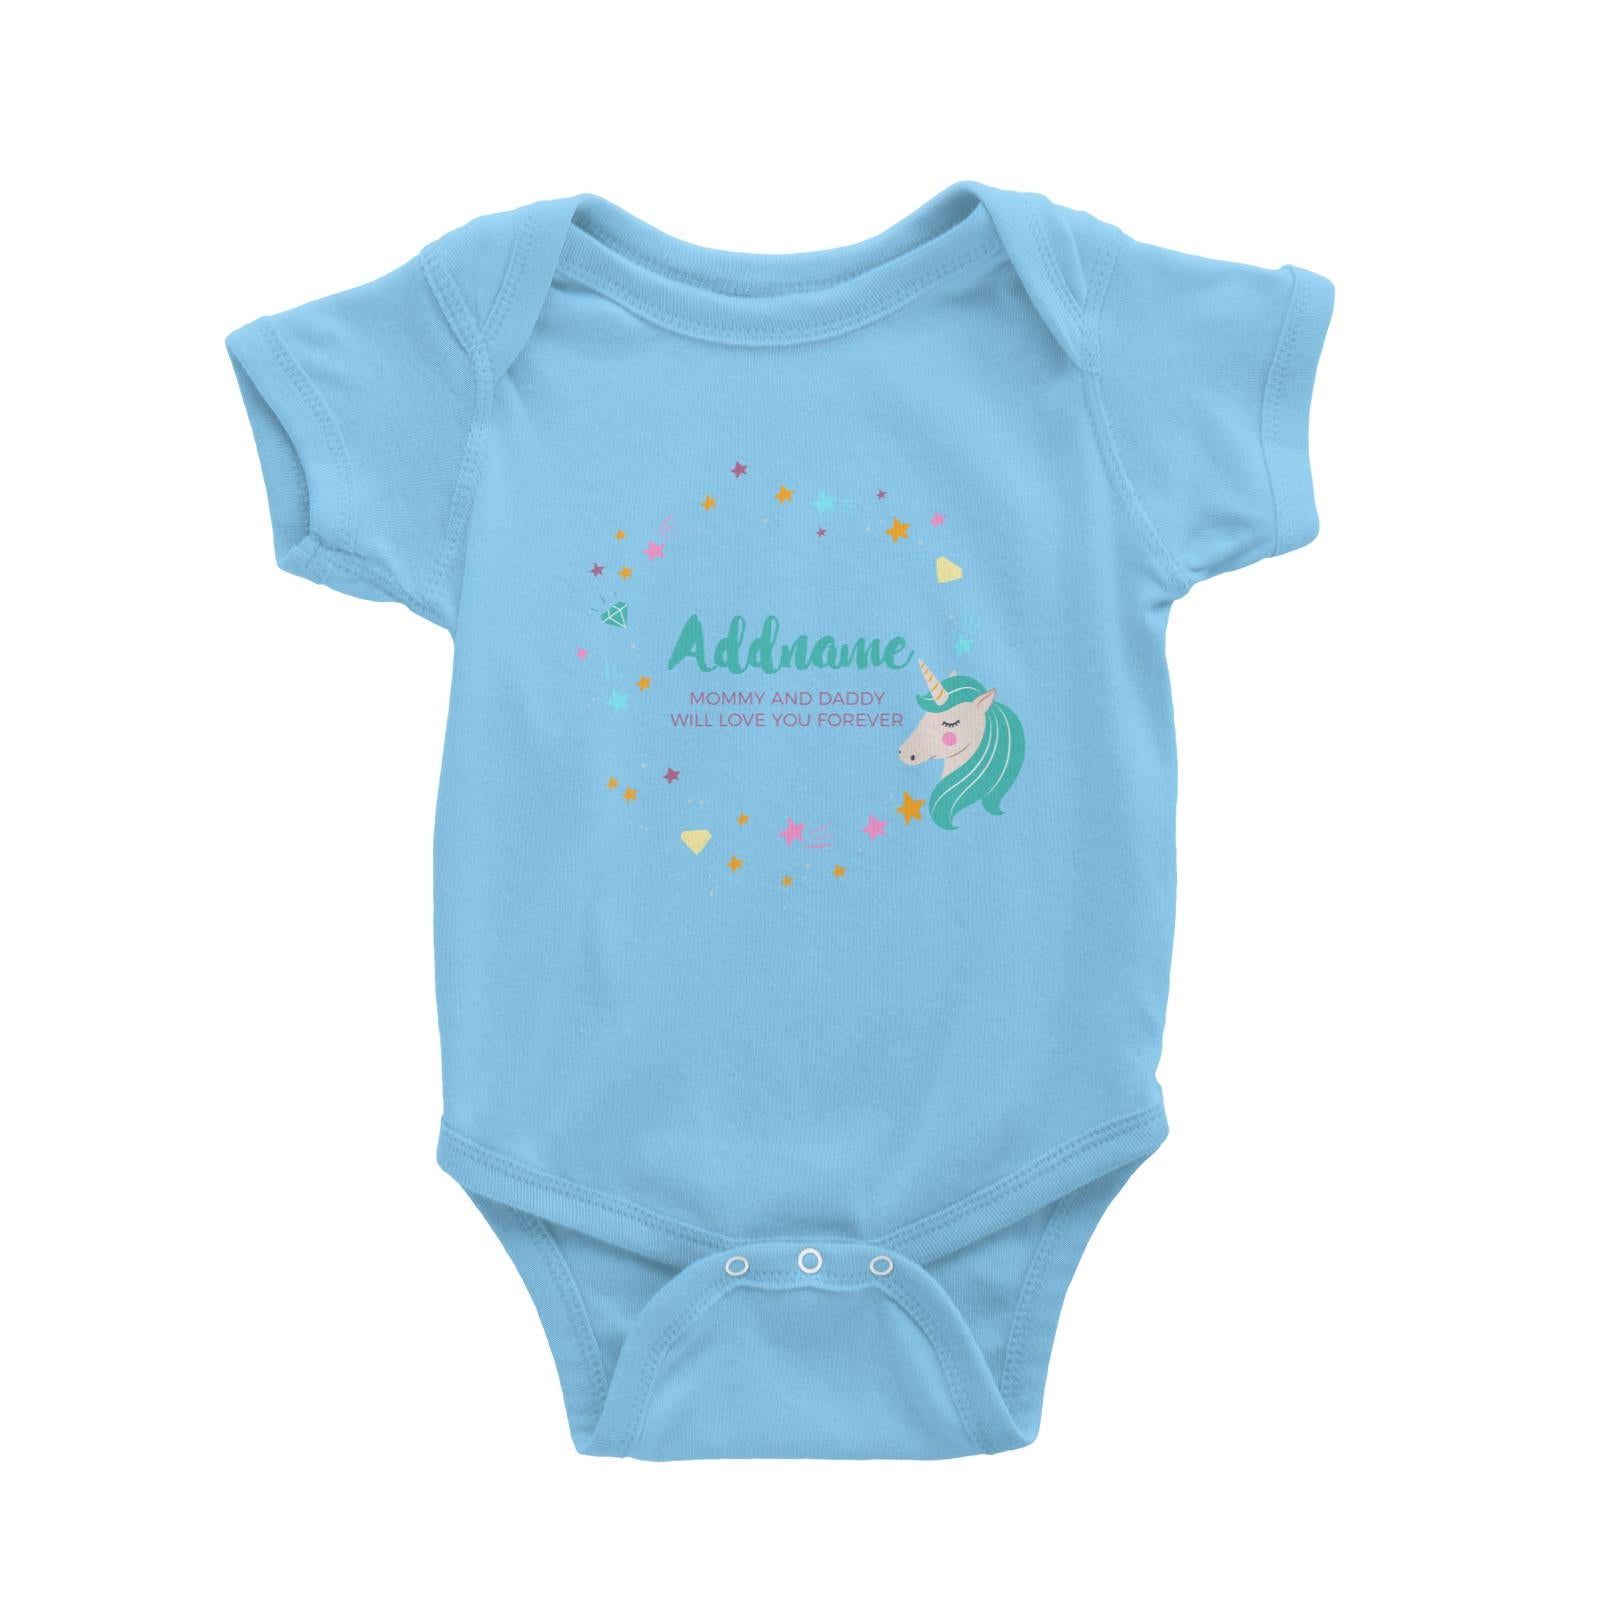 Cute Green Unicorn with Star and Diamond Elements Personalizable with Name and Date Baby Romper